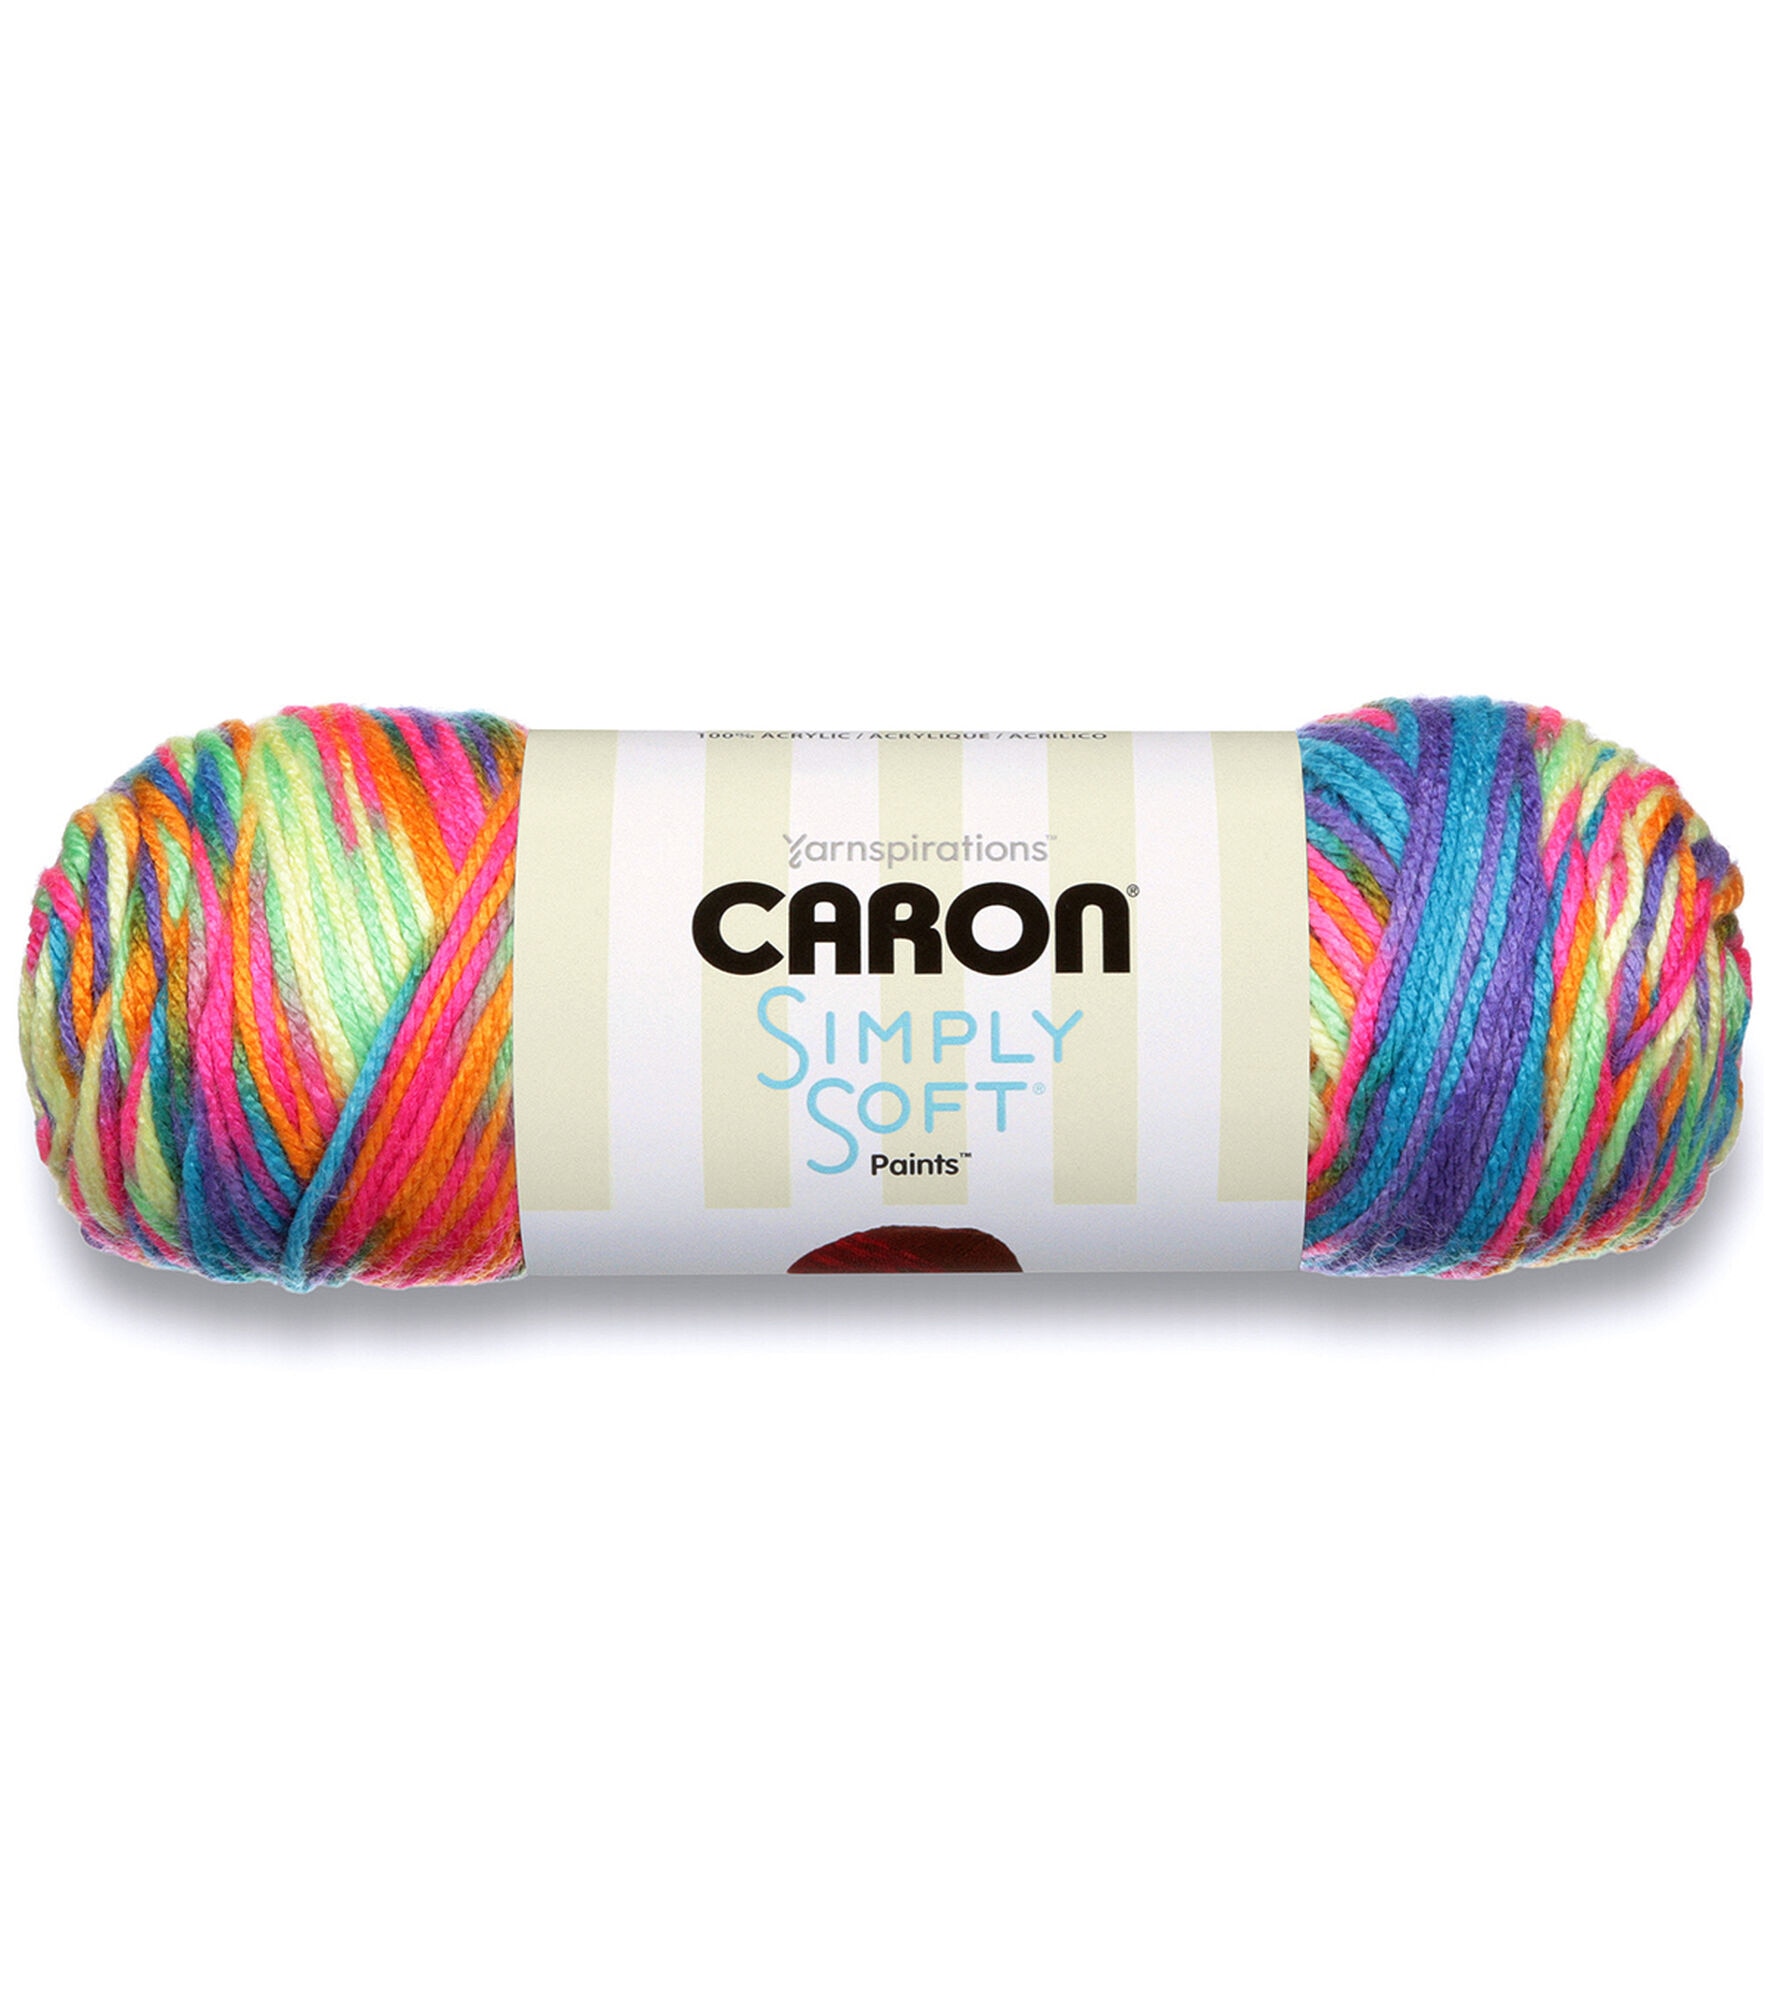 Do you need Caron Cakes pattern ideas? Stop here first! - Jen's a